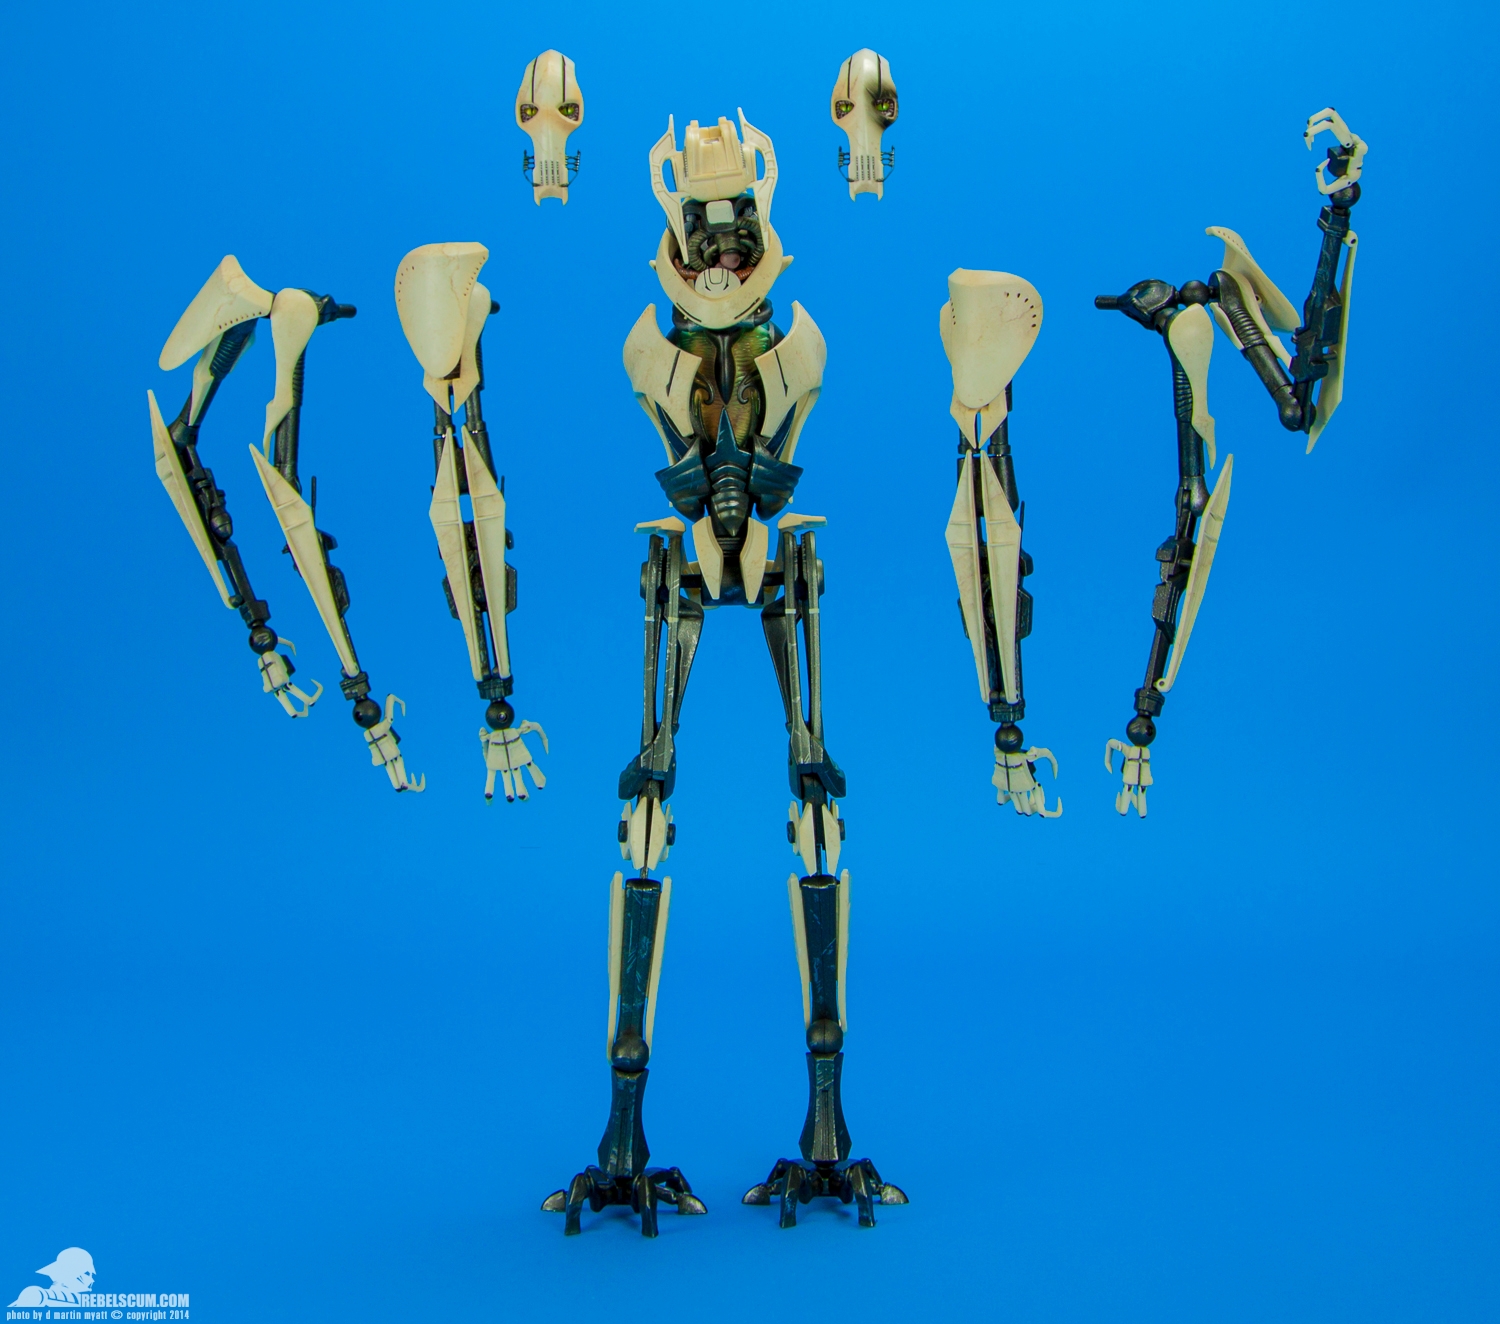 General-Grievous-Sixth-Scale-Figure-Sideshow-Collectibles-017.jpg